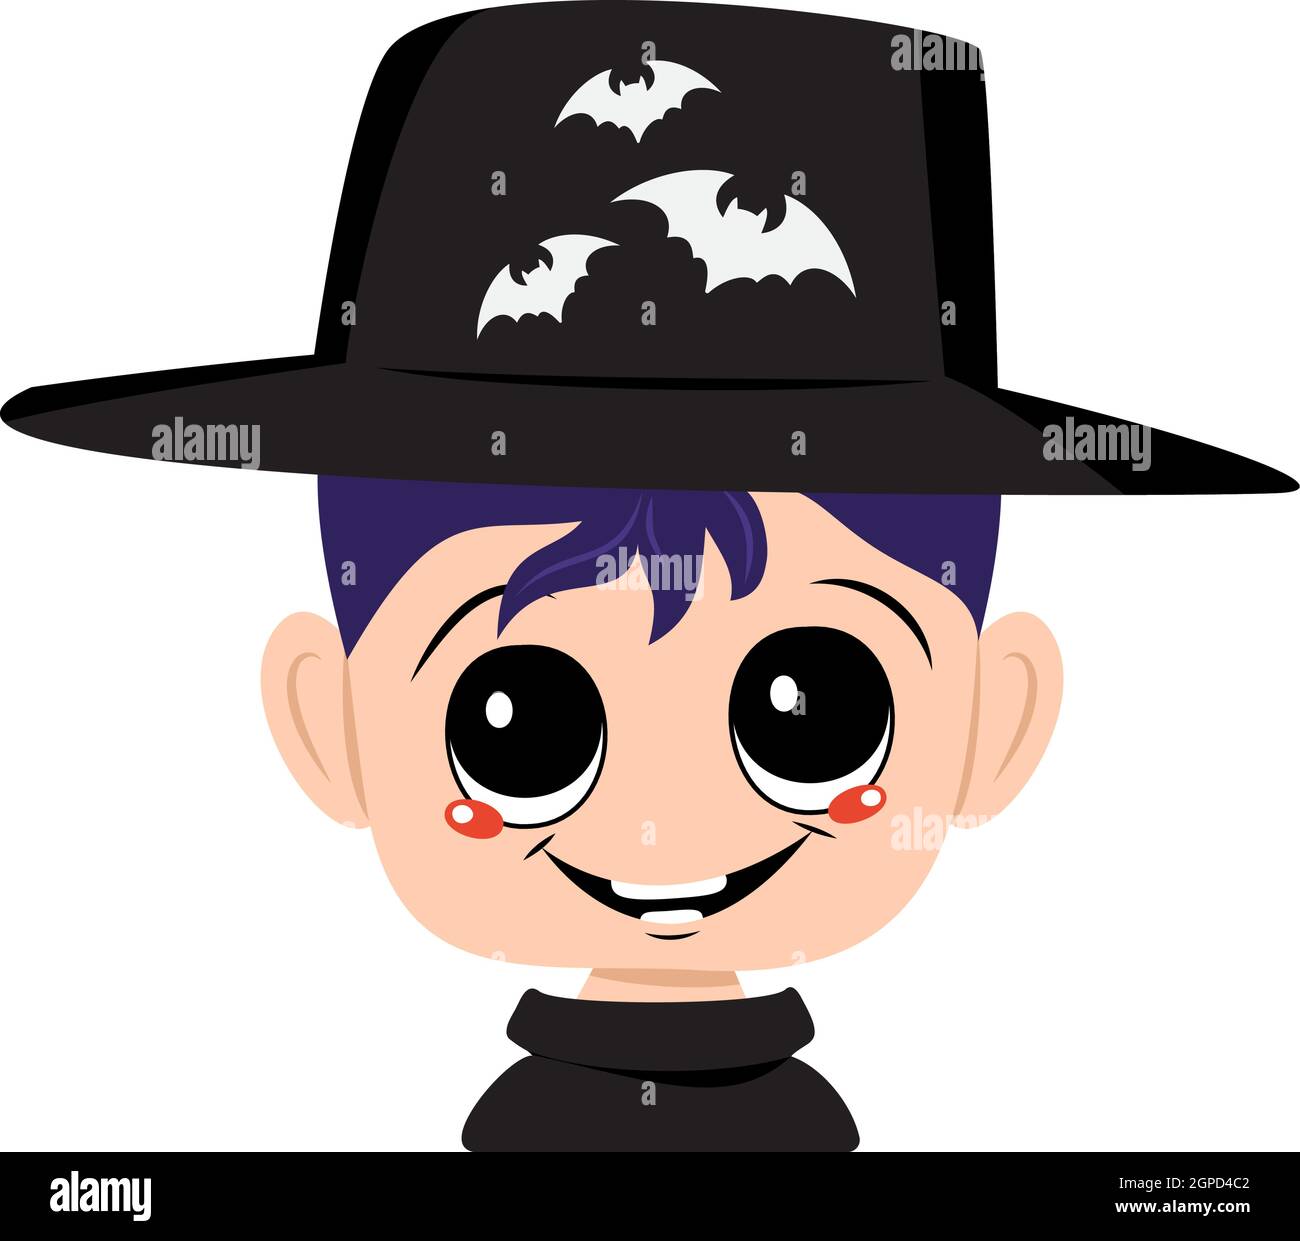 Boy with blue hair, big eyes and a wide happy smile in carnival hat with bats. Head of child with joyful face. Halloween party decoration and costume Stock Vector